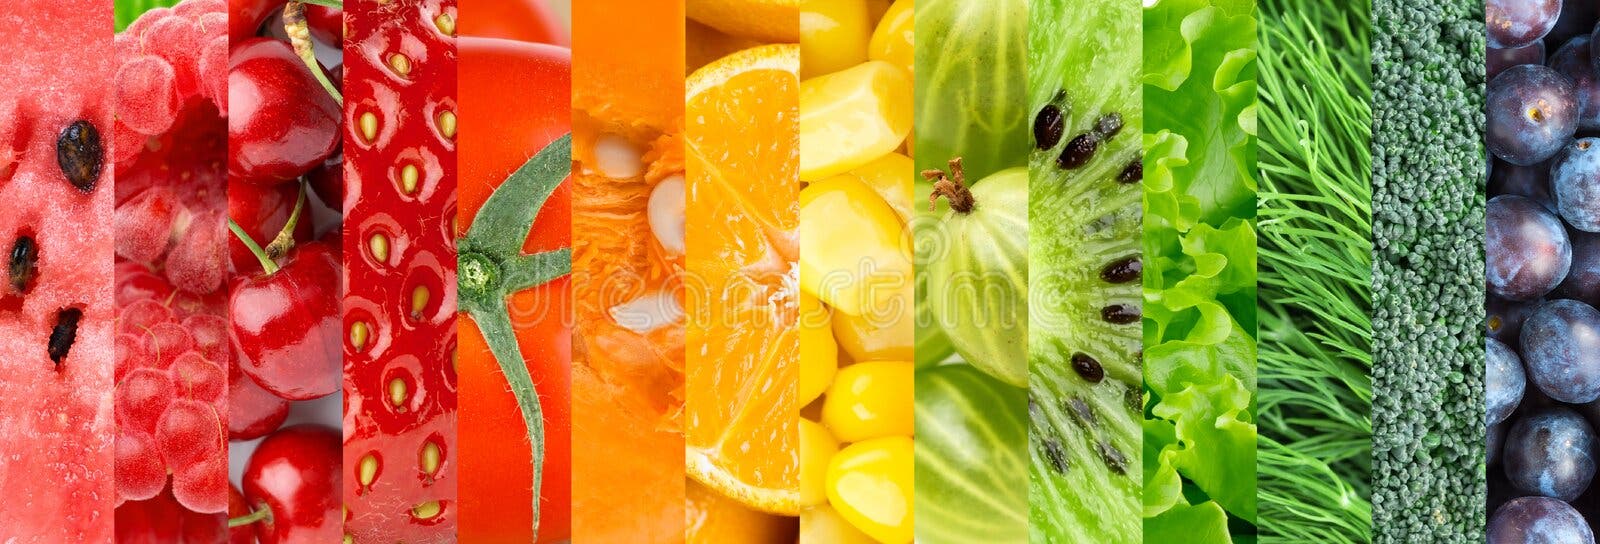 Fresh Fruits And Vegetables. Healthy Food Background Stock Photo, Picture  and Royalty Free Image. Image 45854109.